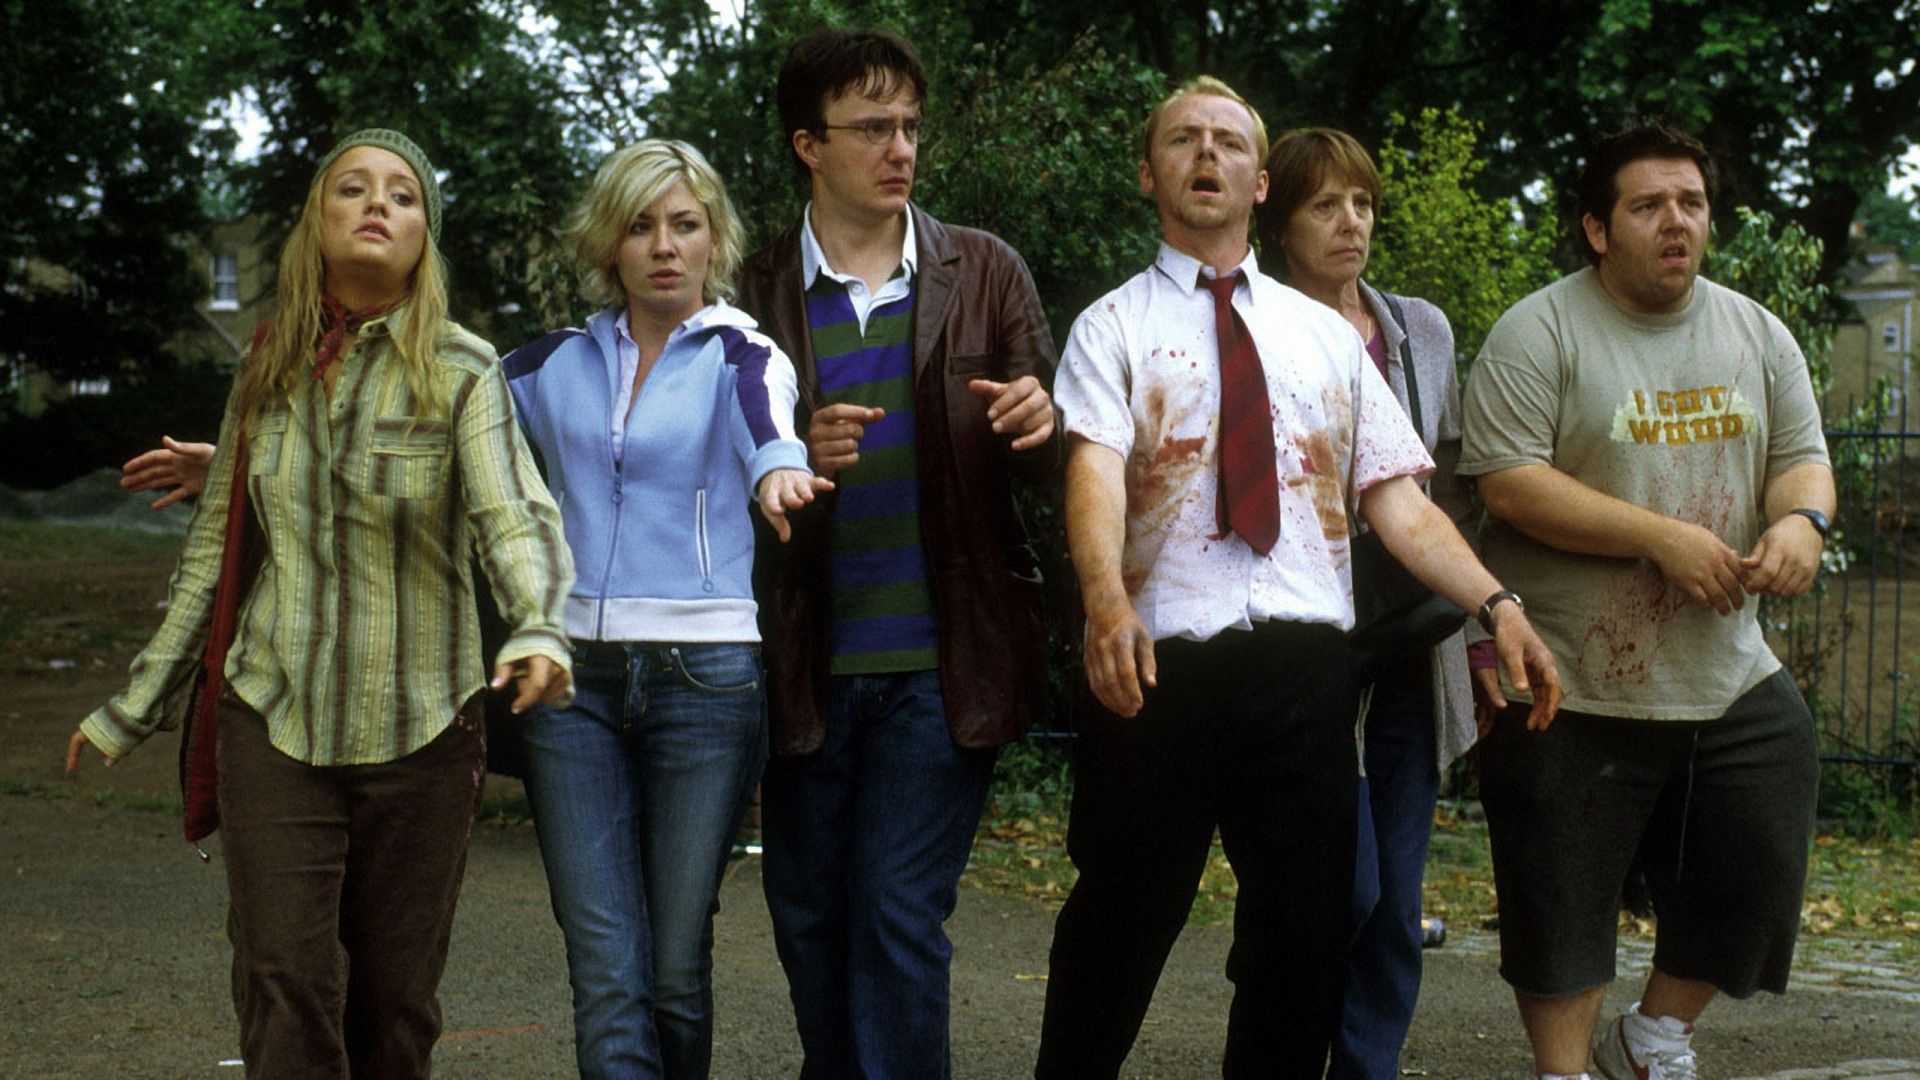 The zombies in Shaun of the Dead are the cure for Gen X disillusionment